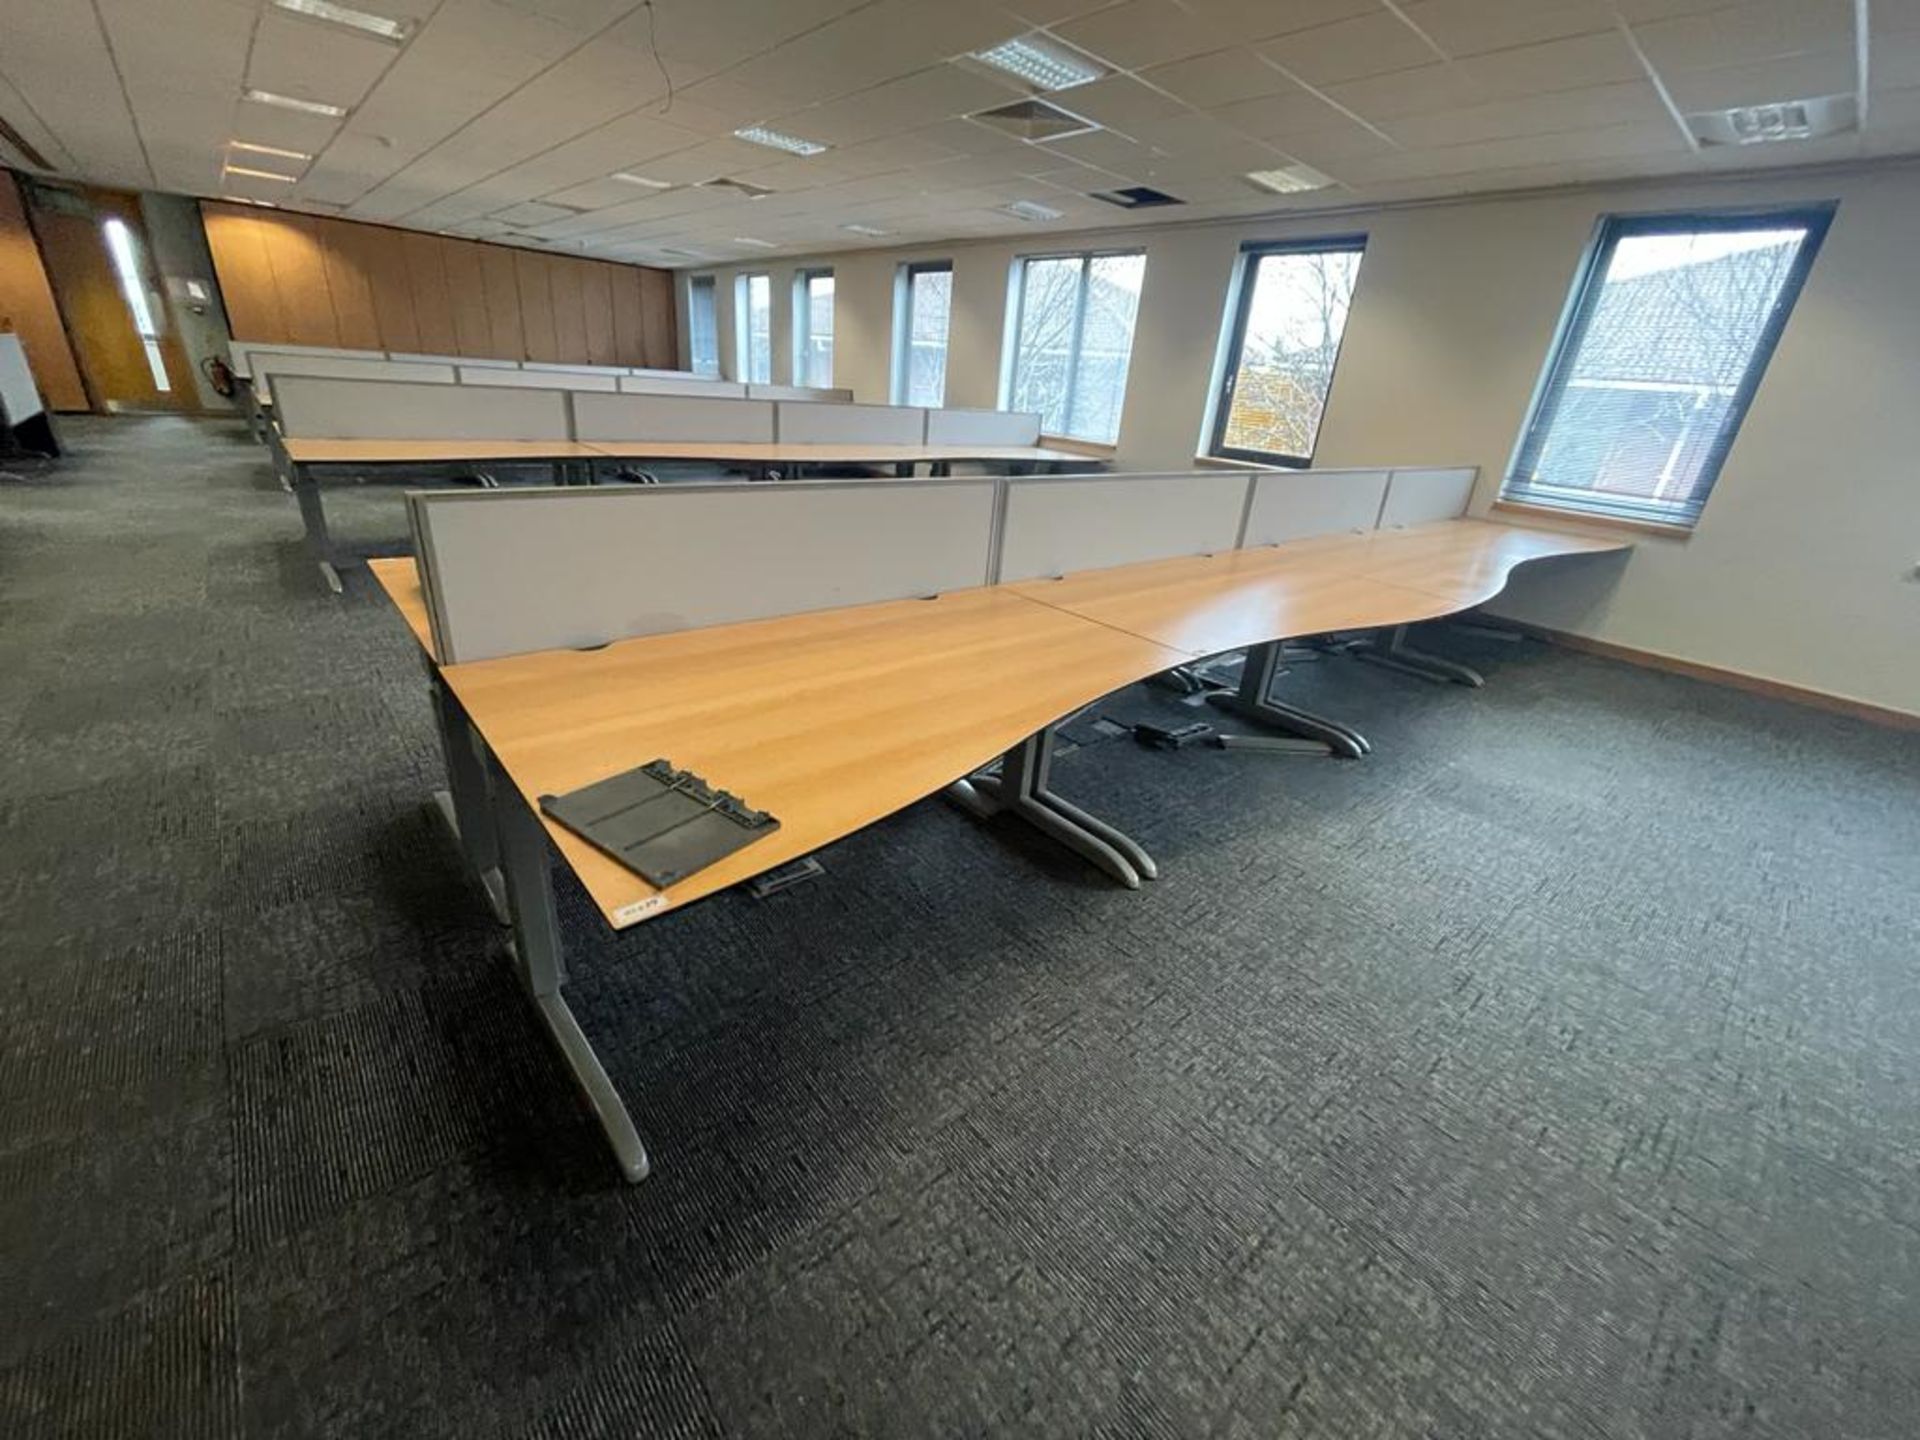 4 x Techo Wave Office Desks With Privacy Panels and Cable Tidy Cages - Beech Wood Finish with Grey - Image 20 of 20